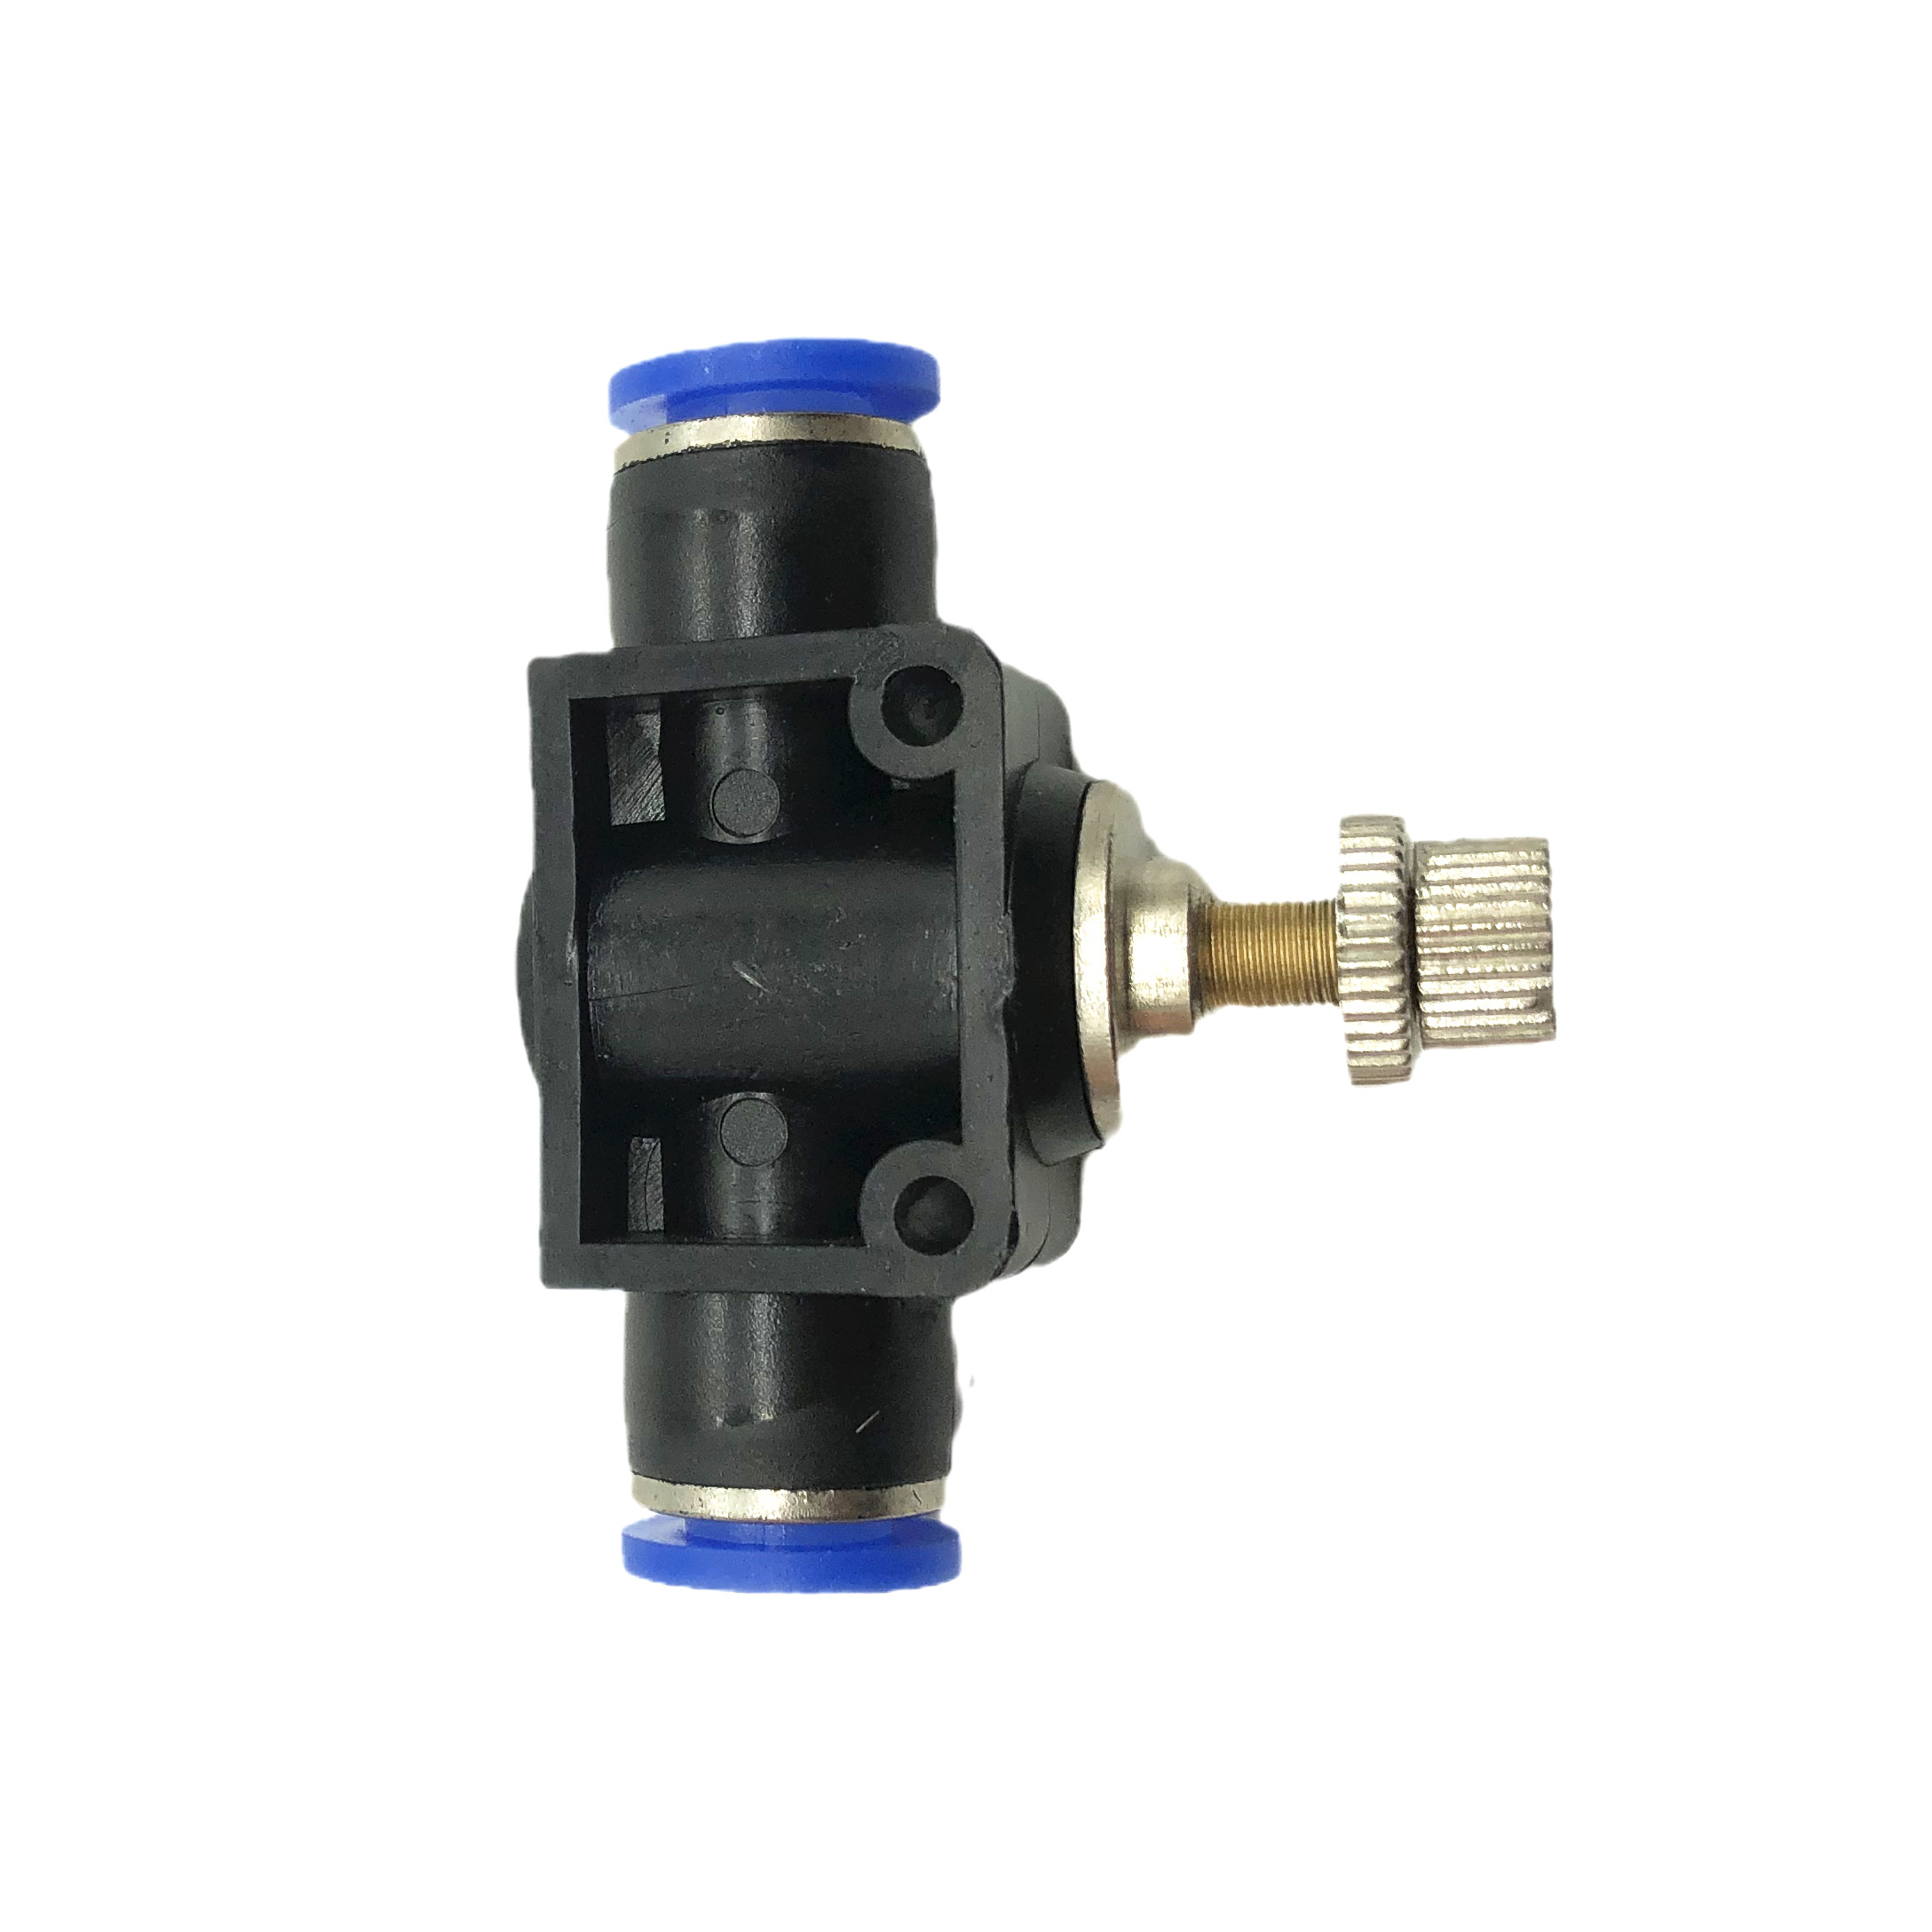 YUMO Pneumatic Gas Pipe Quick Insertion Quick Connector Pipeline Throttle Valve SA-8 Flow Adjustable Regulating Valve